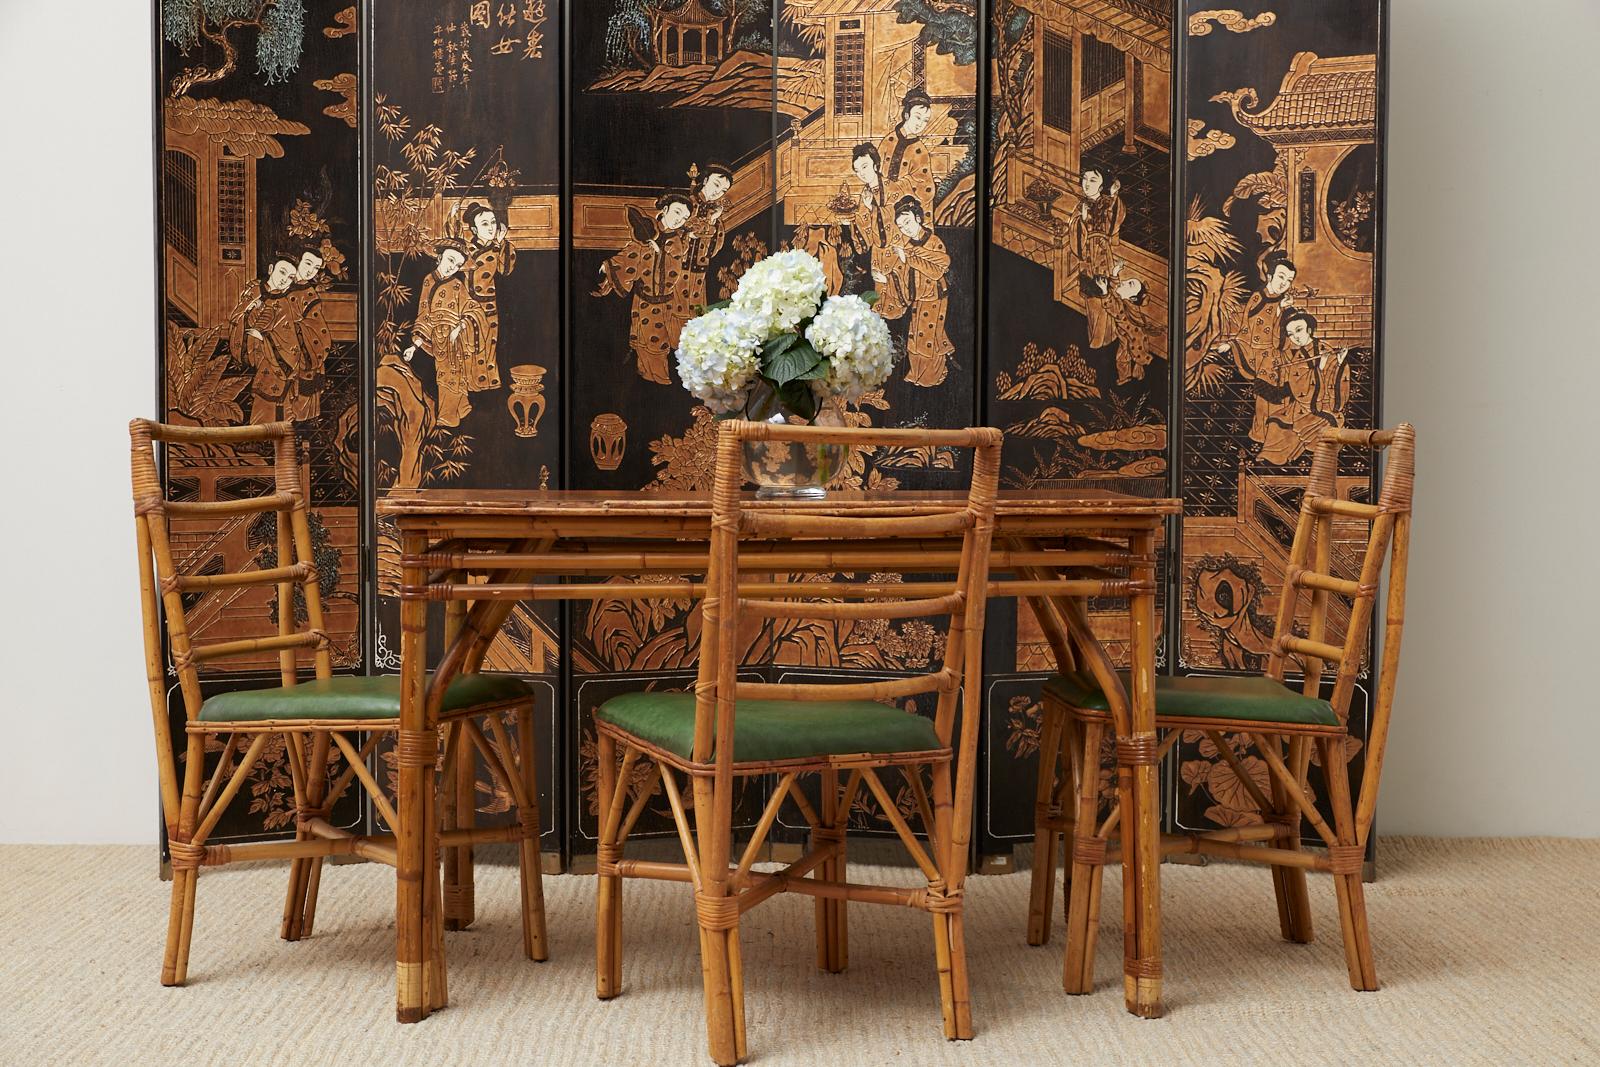 Distinctive set of four Mid-Century Modern dining chairs constructed from handcrafted bamboo rattan poles. The chairs feature a ladder back style with bamboo reinforced backs and cross stretchers conjoining the legs. The chairs have rattan slashing